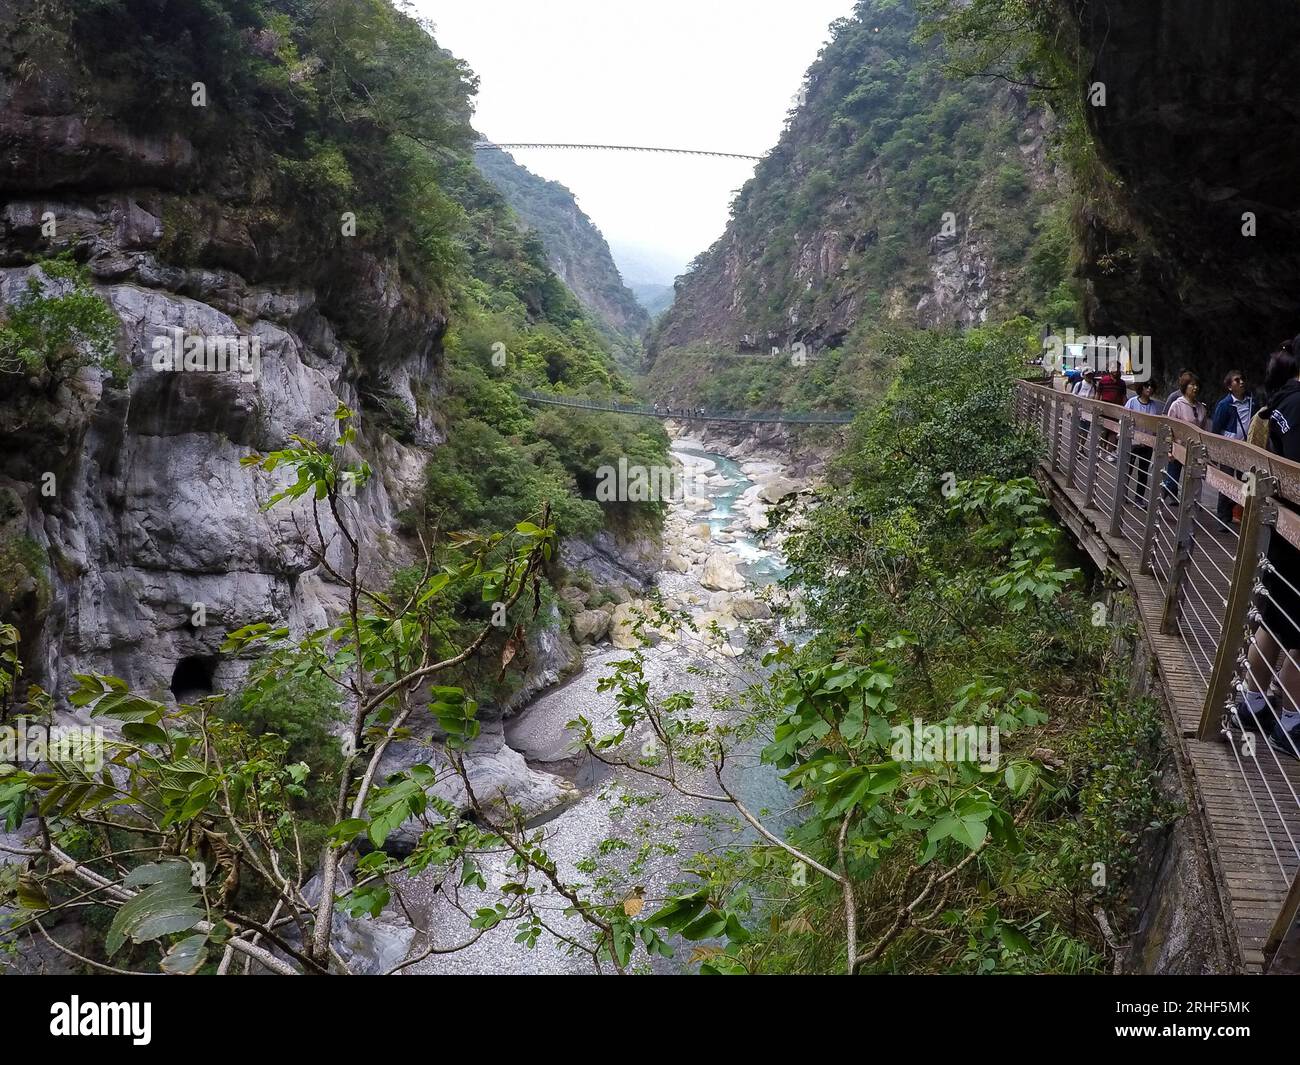 Tourists visiting Taroko Gorge National Park, the most stunning view of nature in Xiulin, Hualien, Taiwan Stock Photo